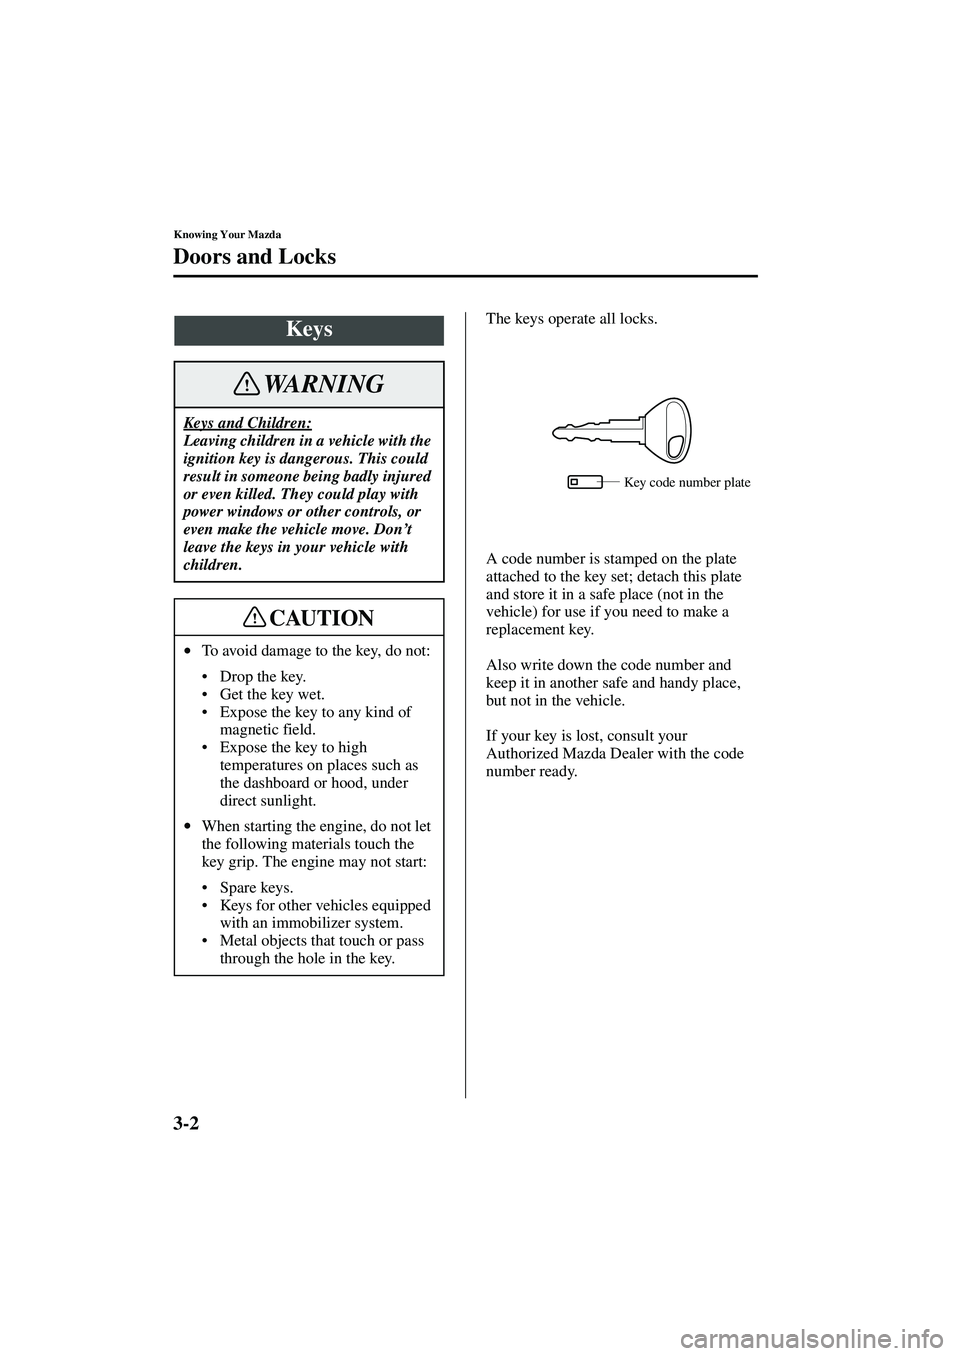 MAZDA MODEL MX-5 MIATA 2002  Owners Manual 3-2
Knowing Your Mazda
Form No. 8Q42-EA-01F
Doors and Locks
The keys operate all locks.
A code number is stamped on the plate 
attached to the key set; detach this plate 
and store it in a safe place 